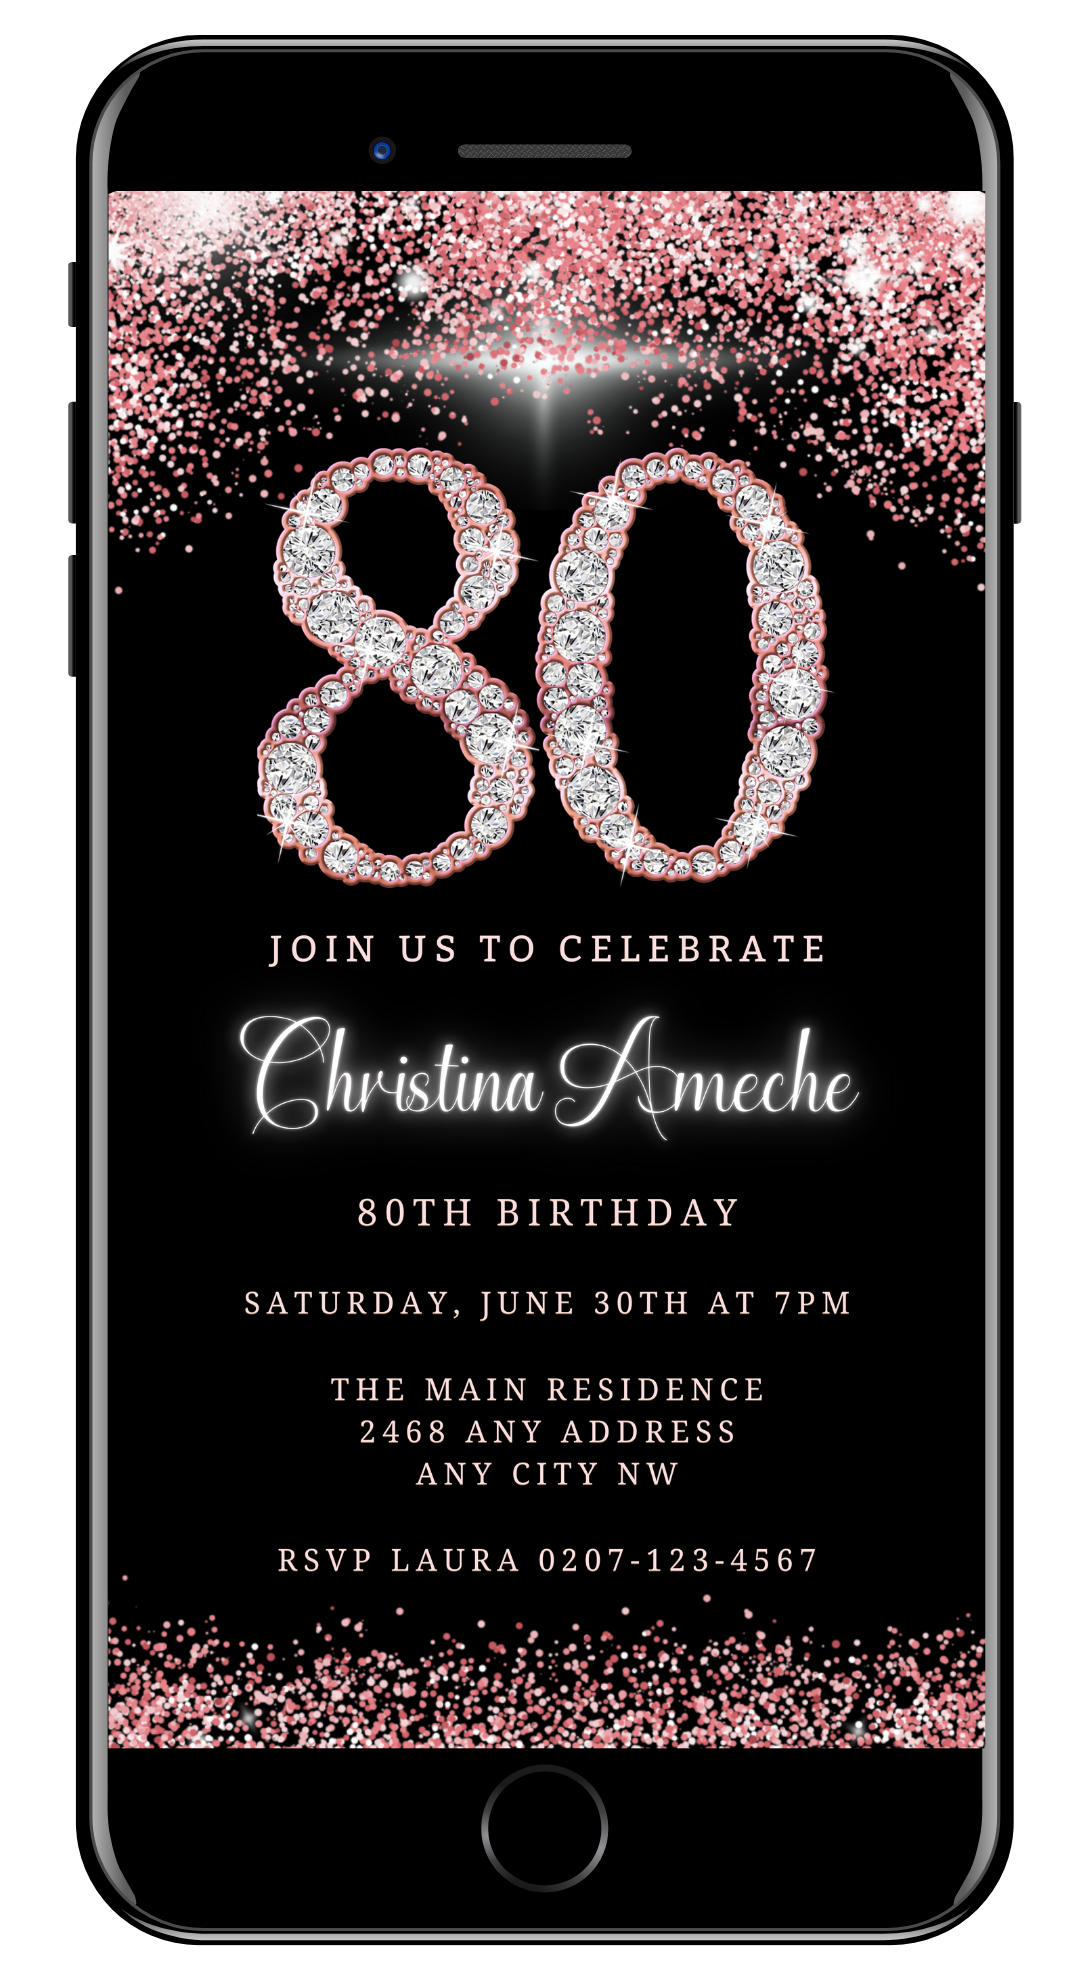 Customizable digital invitation featuring a 80th Birthday text in rose gold glitter with diamond accents, designed for smartphones. Editable via Canva and ideal for electronic sharing.